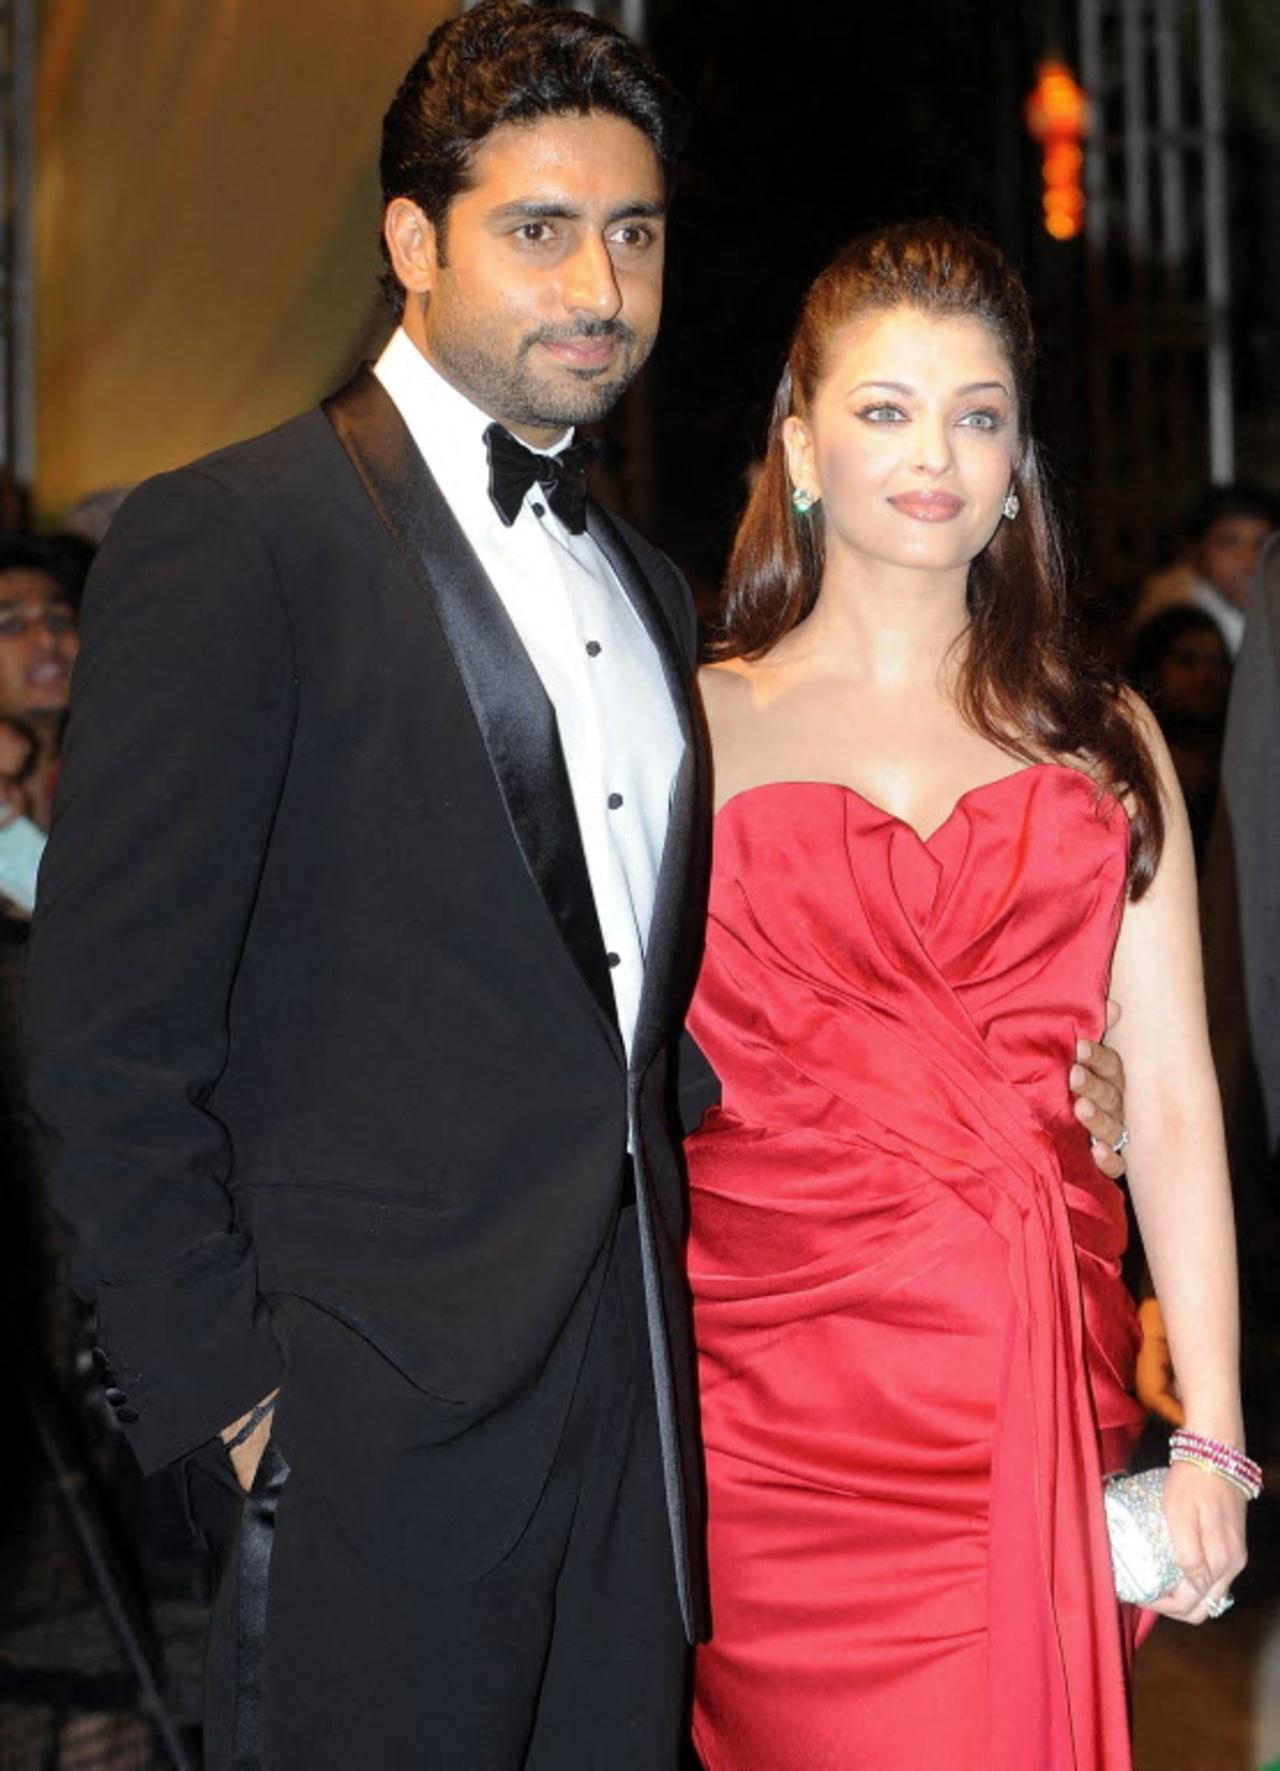 For the main ceremony, Aishwarya made headlines in a hot red strapless gown as she arrived with Abhishek. 